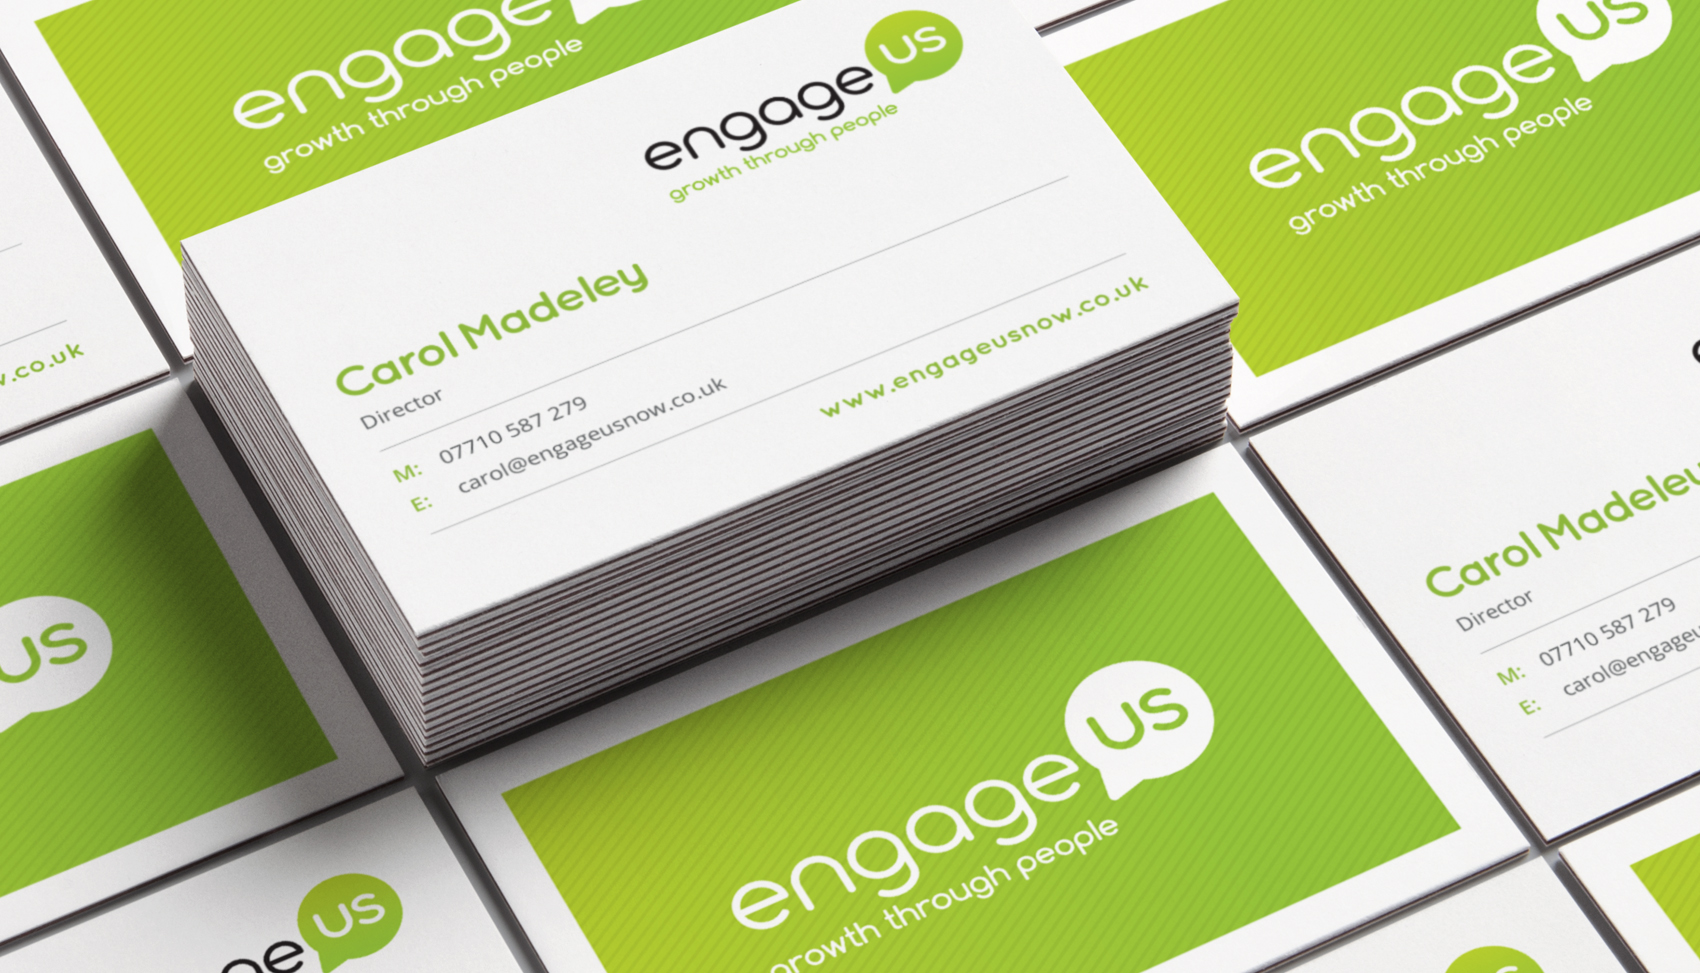 Engage us - Business Cards